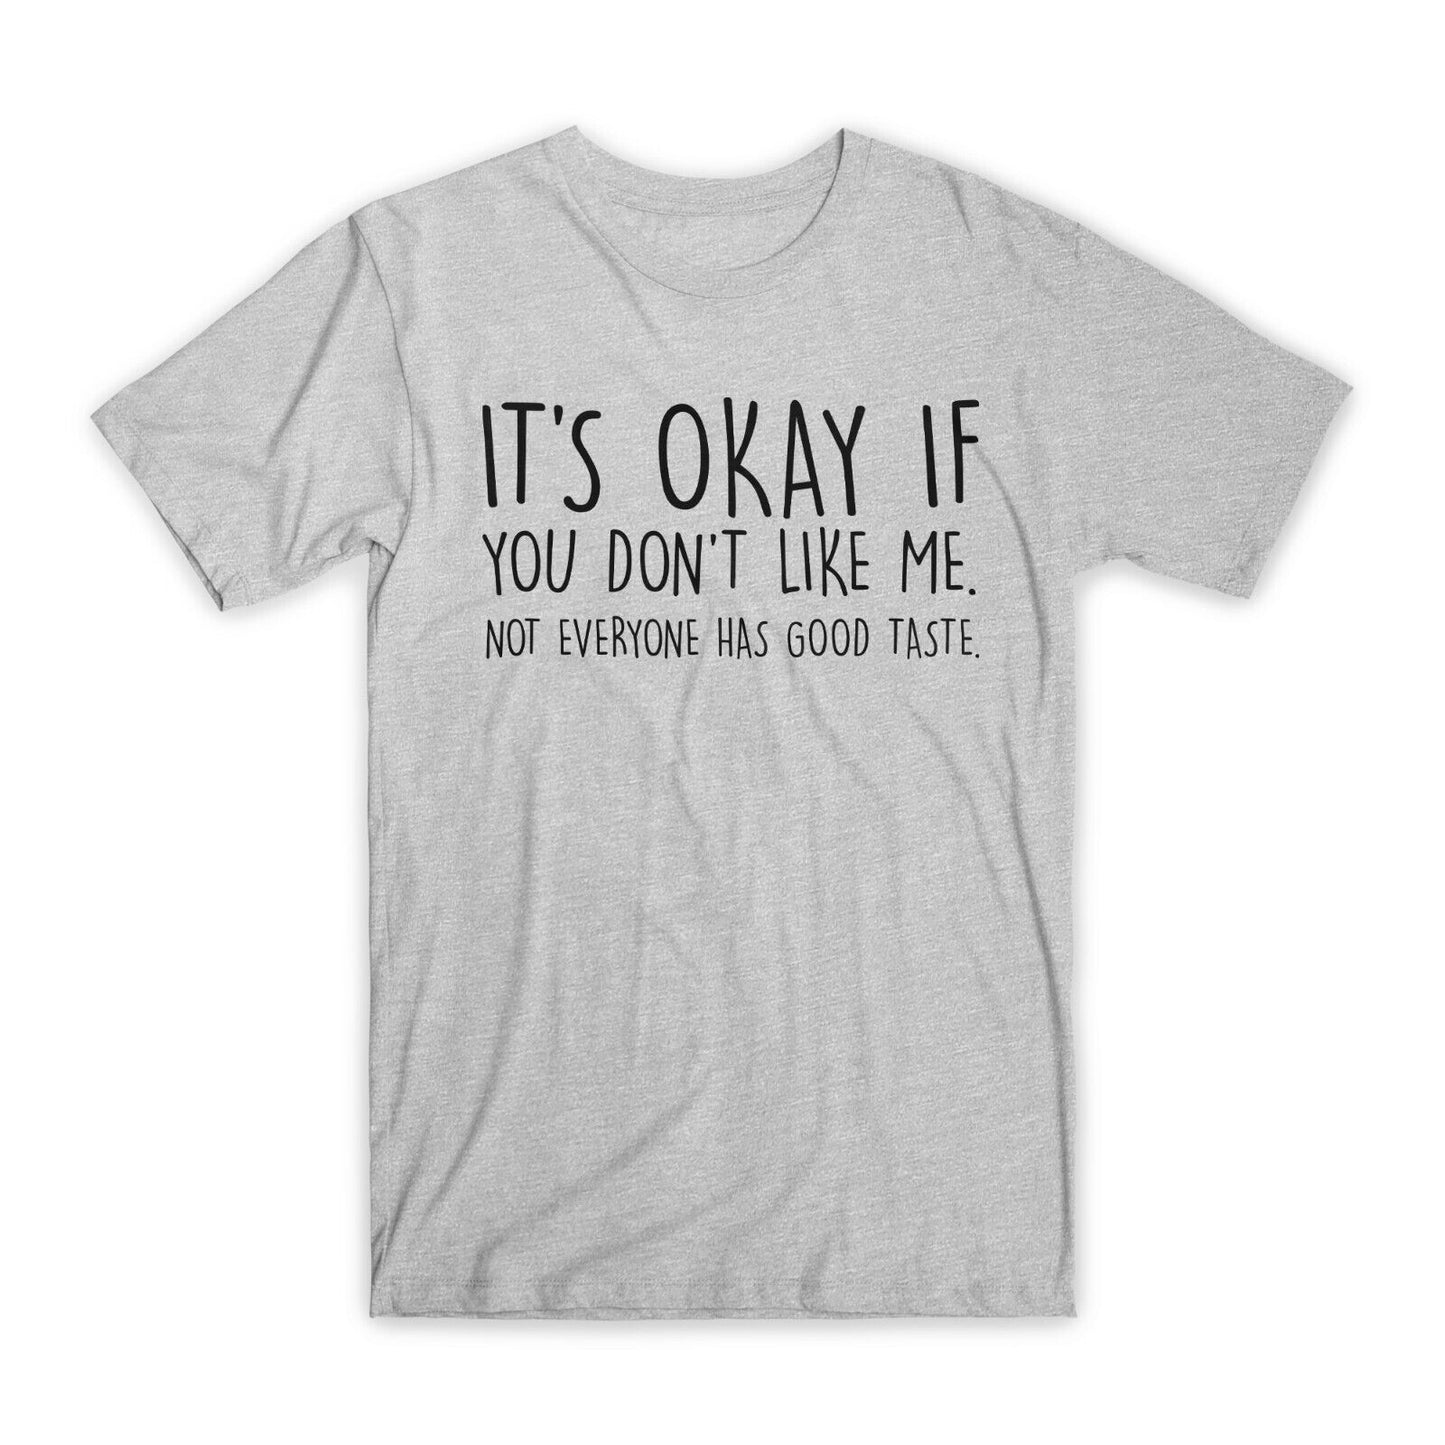 It's Okay If You Don't Like Me T-Shirt Premium Soft Cotton Funny Tees Gifts NEW